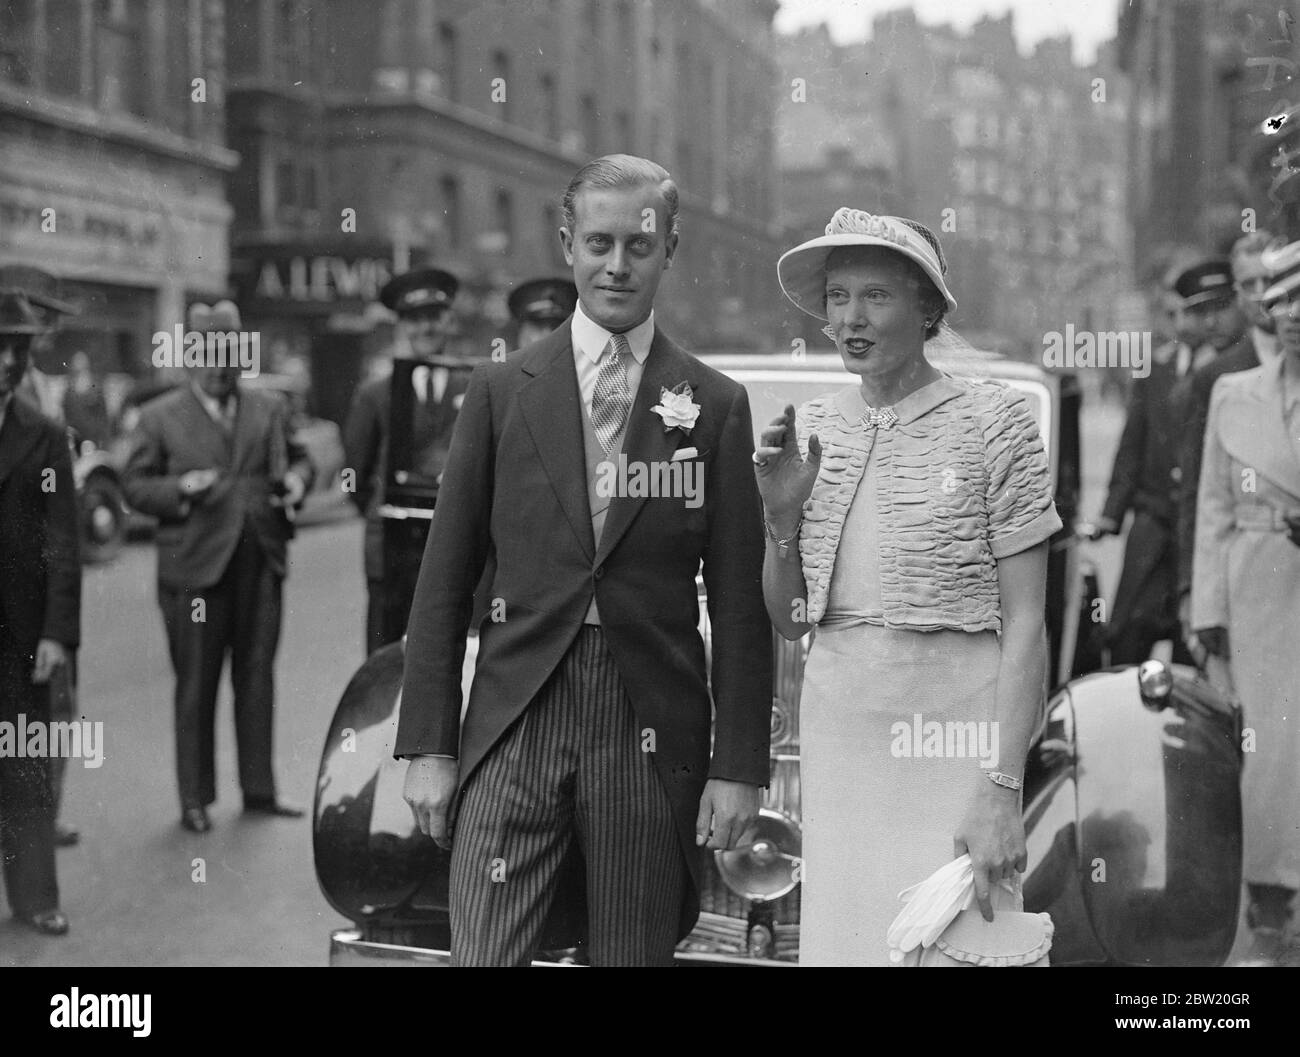 Earl of Normanton weds daughter of Baroness Zouche at London Register Office. The Earl of Normanton was married to 31-year-old Mrs Palmer, daughter of Baroness Zouche, at Caxton Hall register office, London. The Earl is 27. The civil ceremony was followed by a religious ceremony at St Ethelburga's , Bishopsgate. Photo shows, the bride and bridegroom leaving Caxton Hall after their wedding. 5 July 1937 Stock Photo